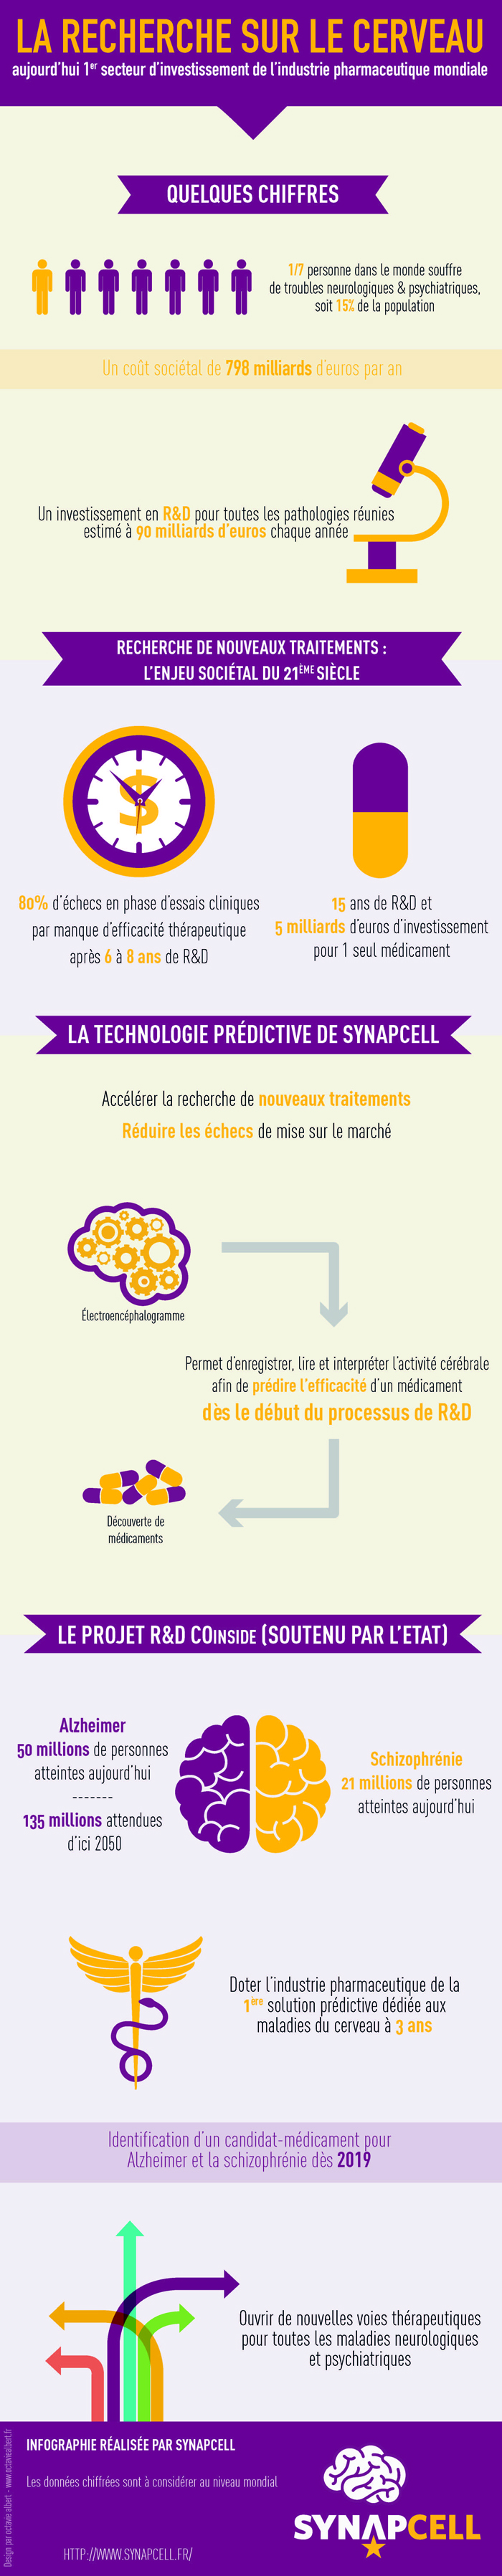 2015_synapcell_infographie